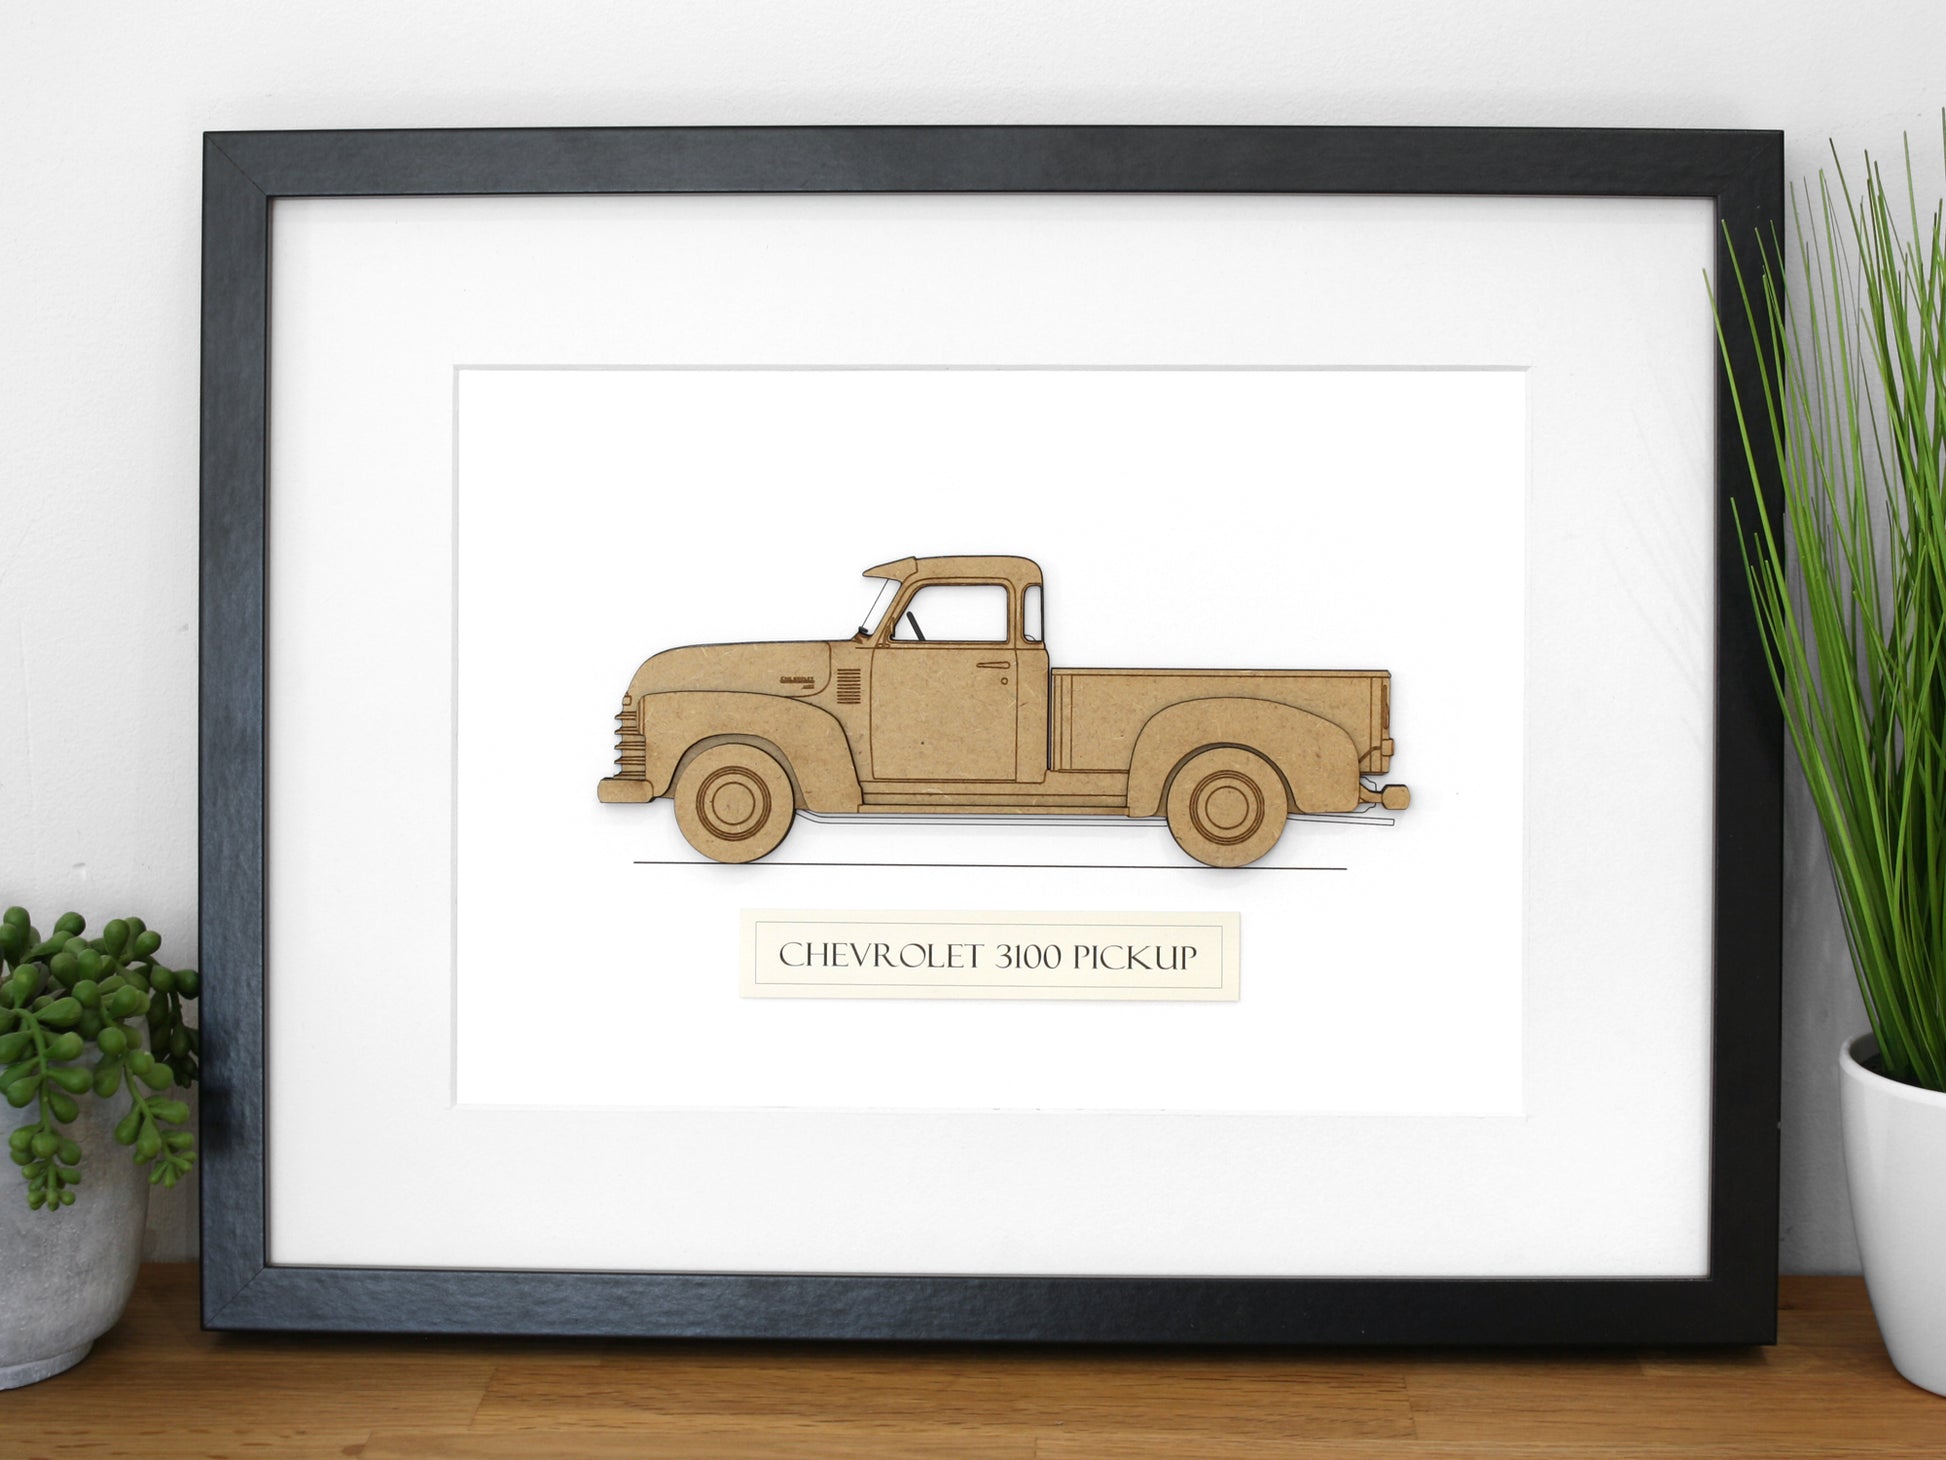 Chevrolet 3100 Pickup gifts